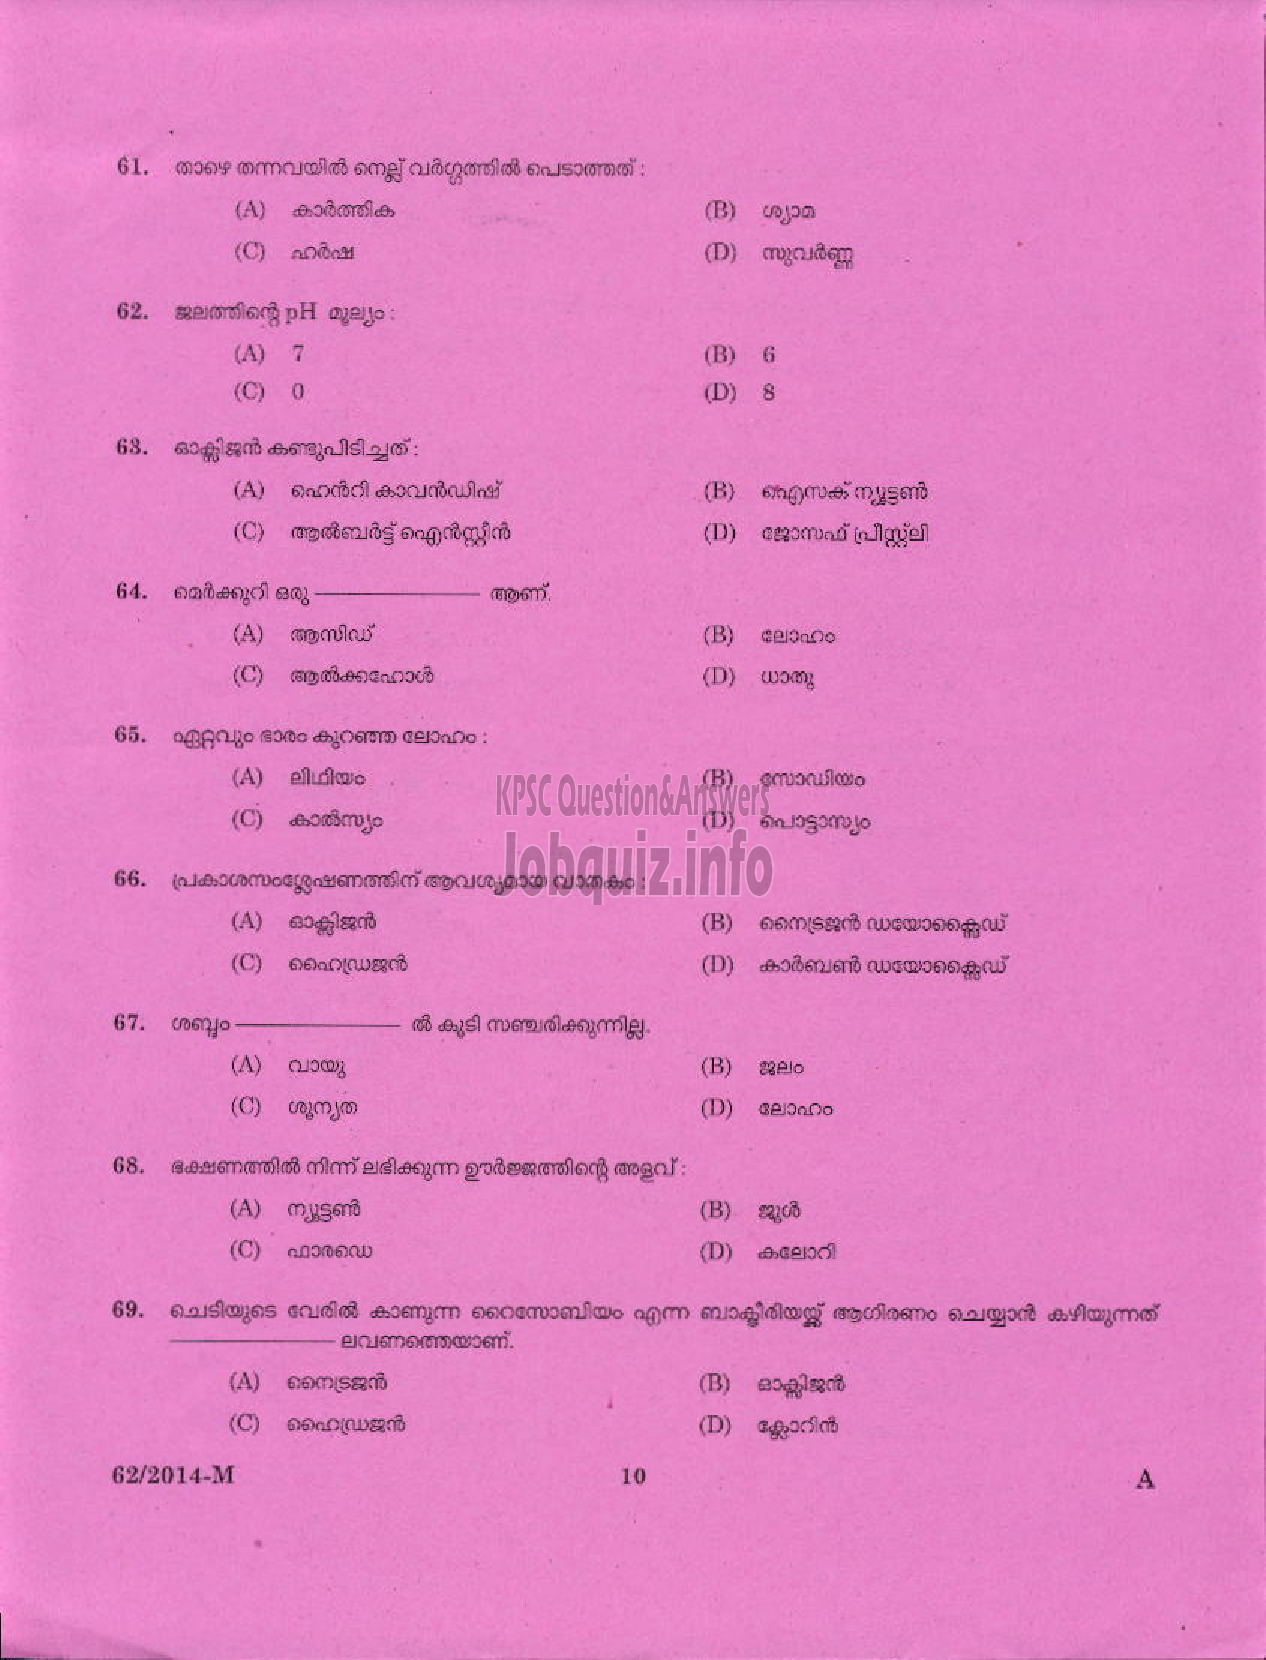 Kerala PSC Question Paper - ATTENDER PLATE CLEANING SURVEY AND LAND RECORDS TVPM ( Malayalam ) -8